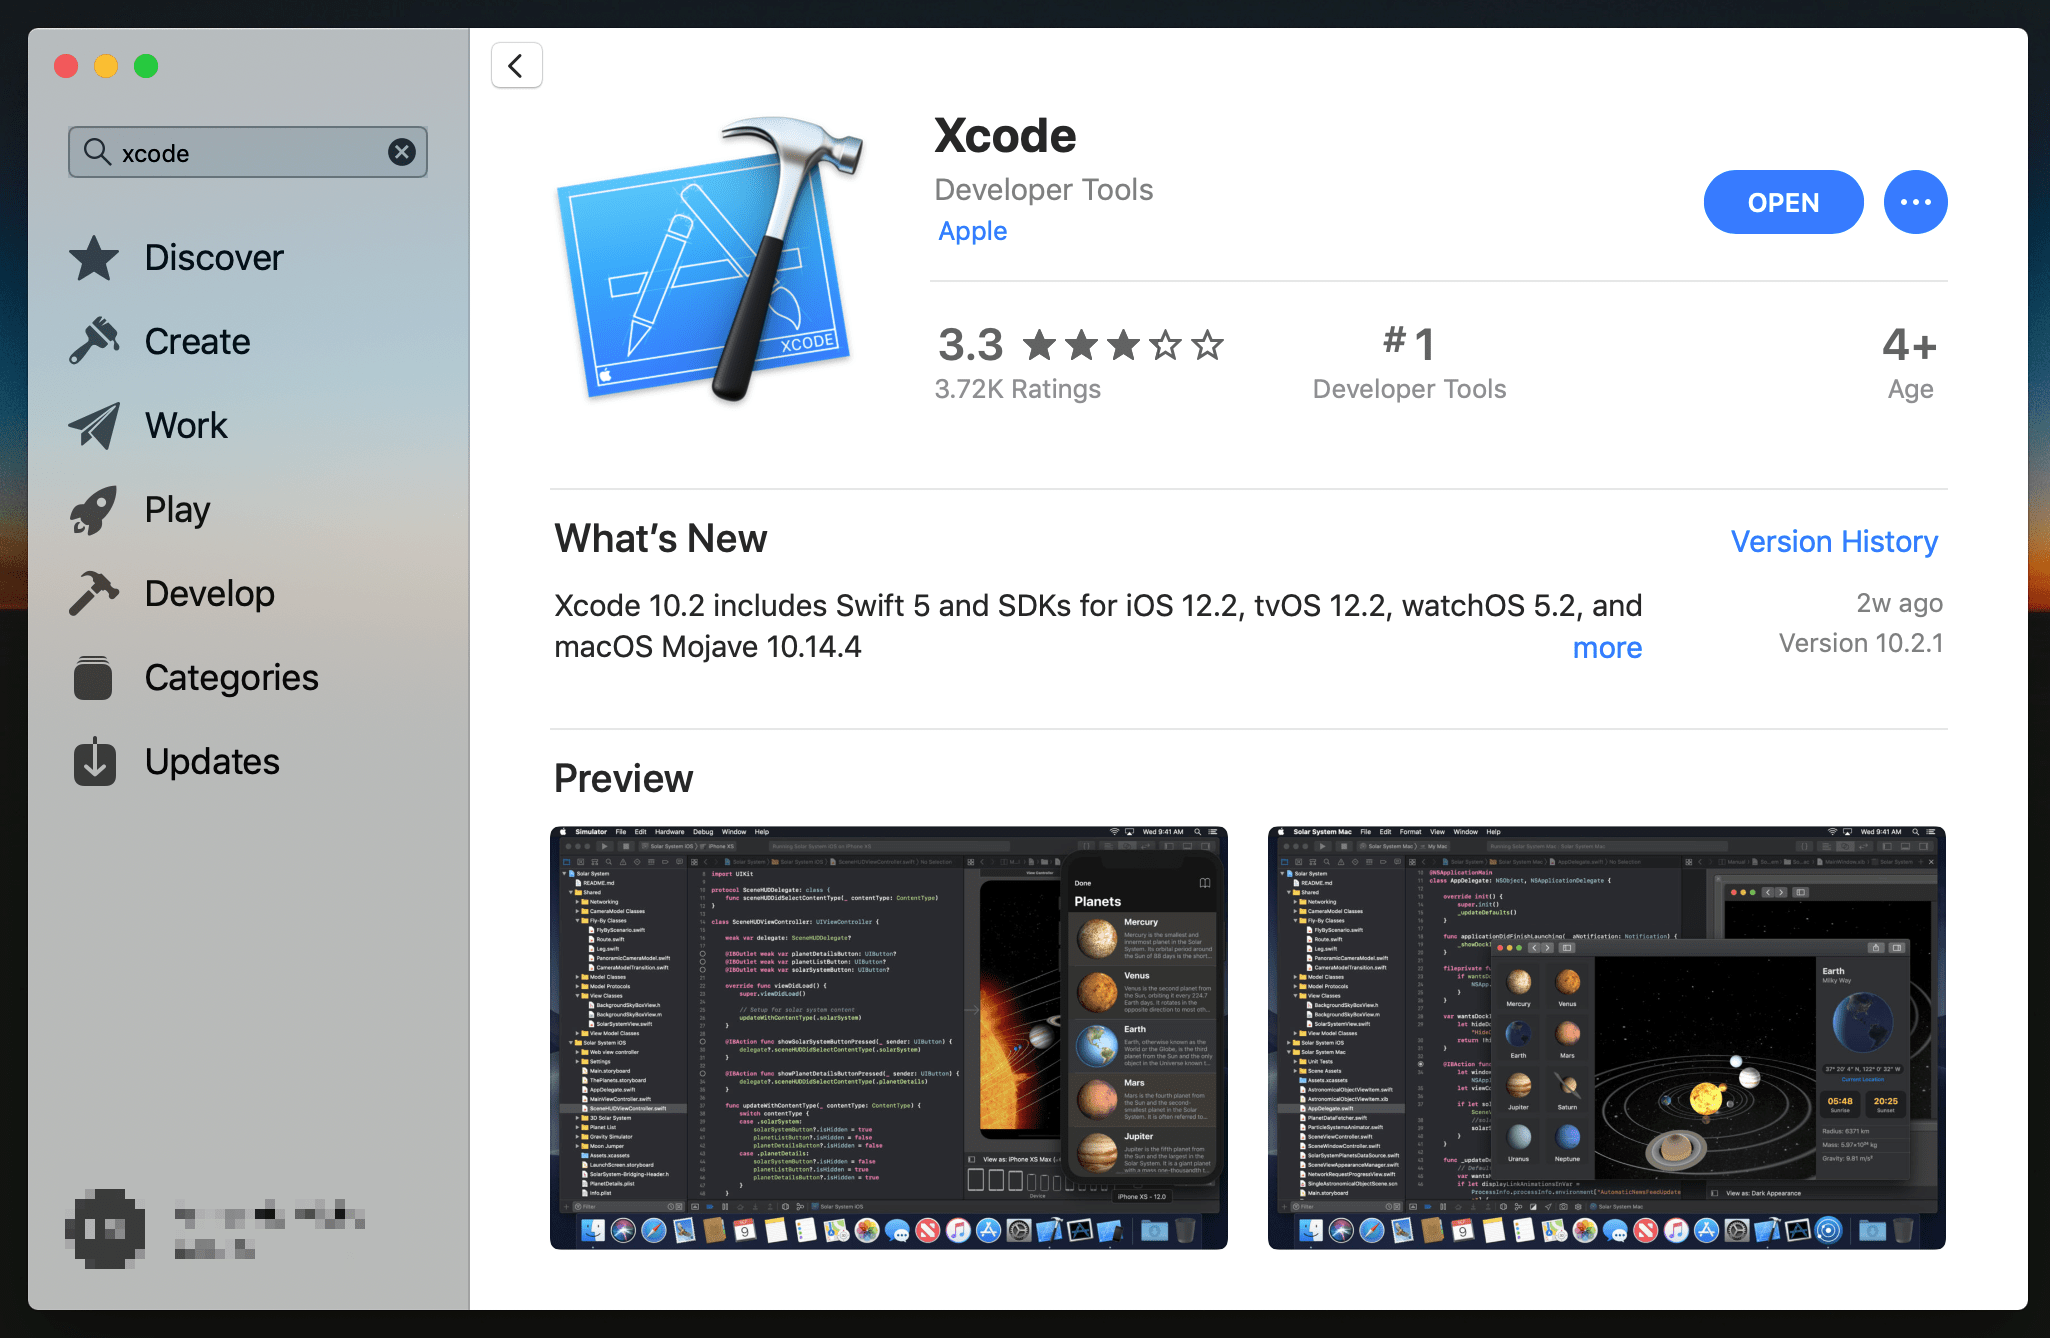 App Store: Xcode app page